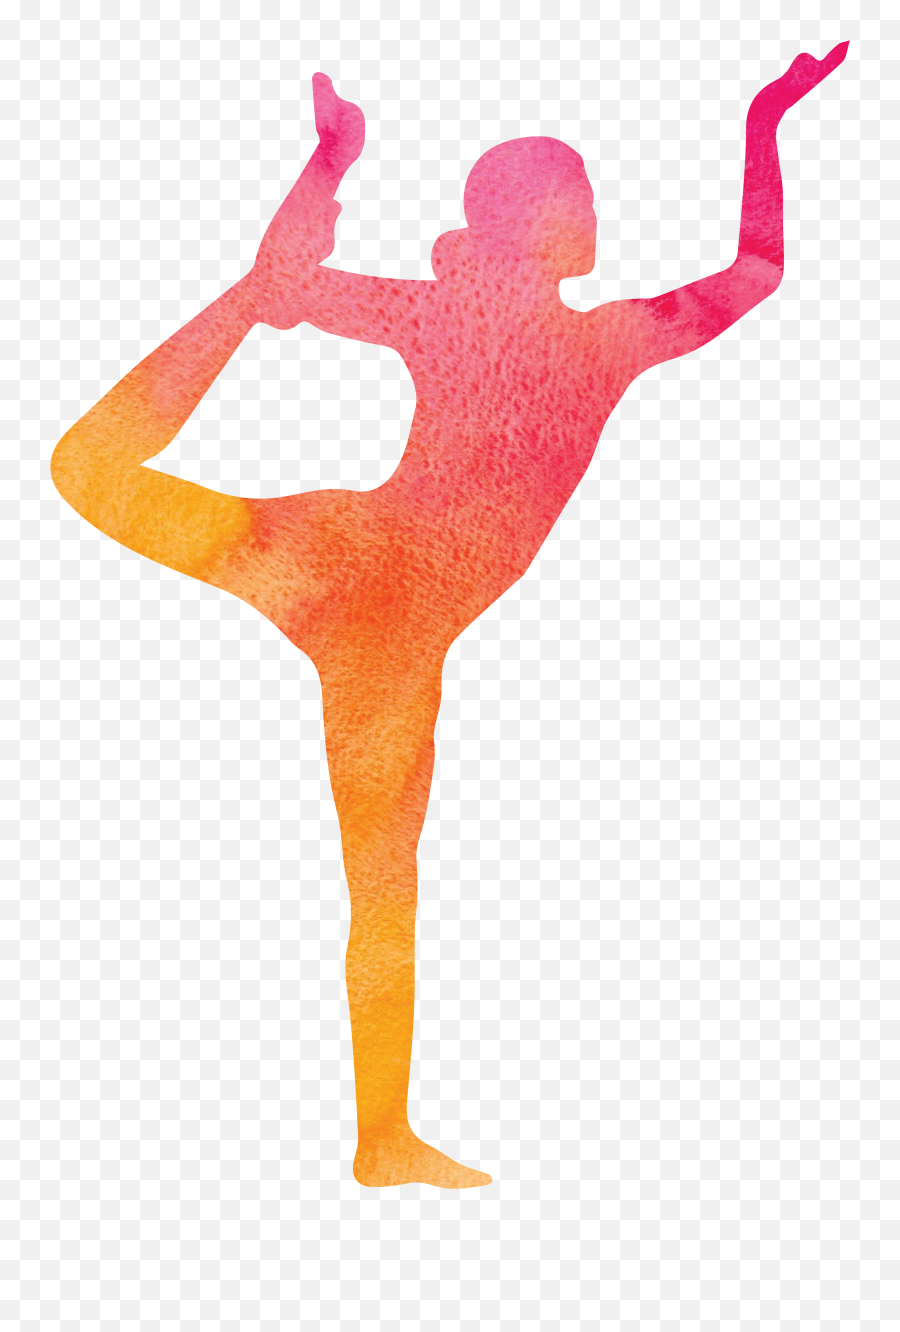 Download wallpapers yoga, exercise, coach, meditation, yoga concepts, gym  for desktop free. Pictures for desktop free | Yoga poses, Power yoga  workout, Yoga for flexibility